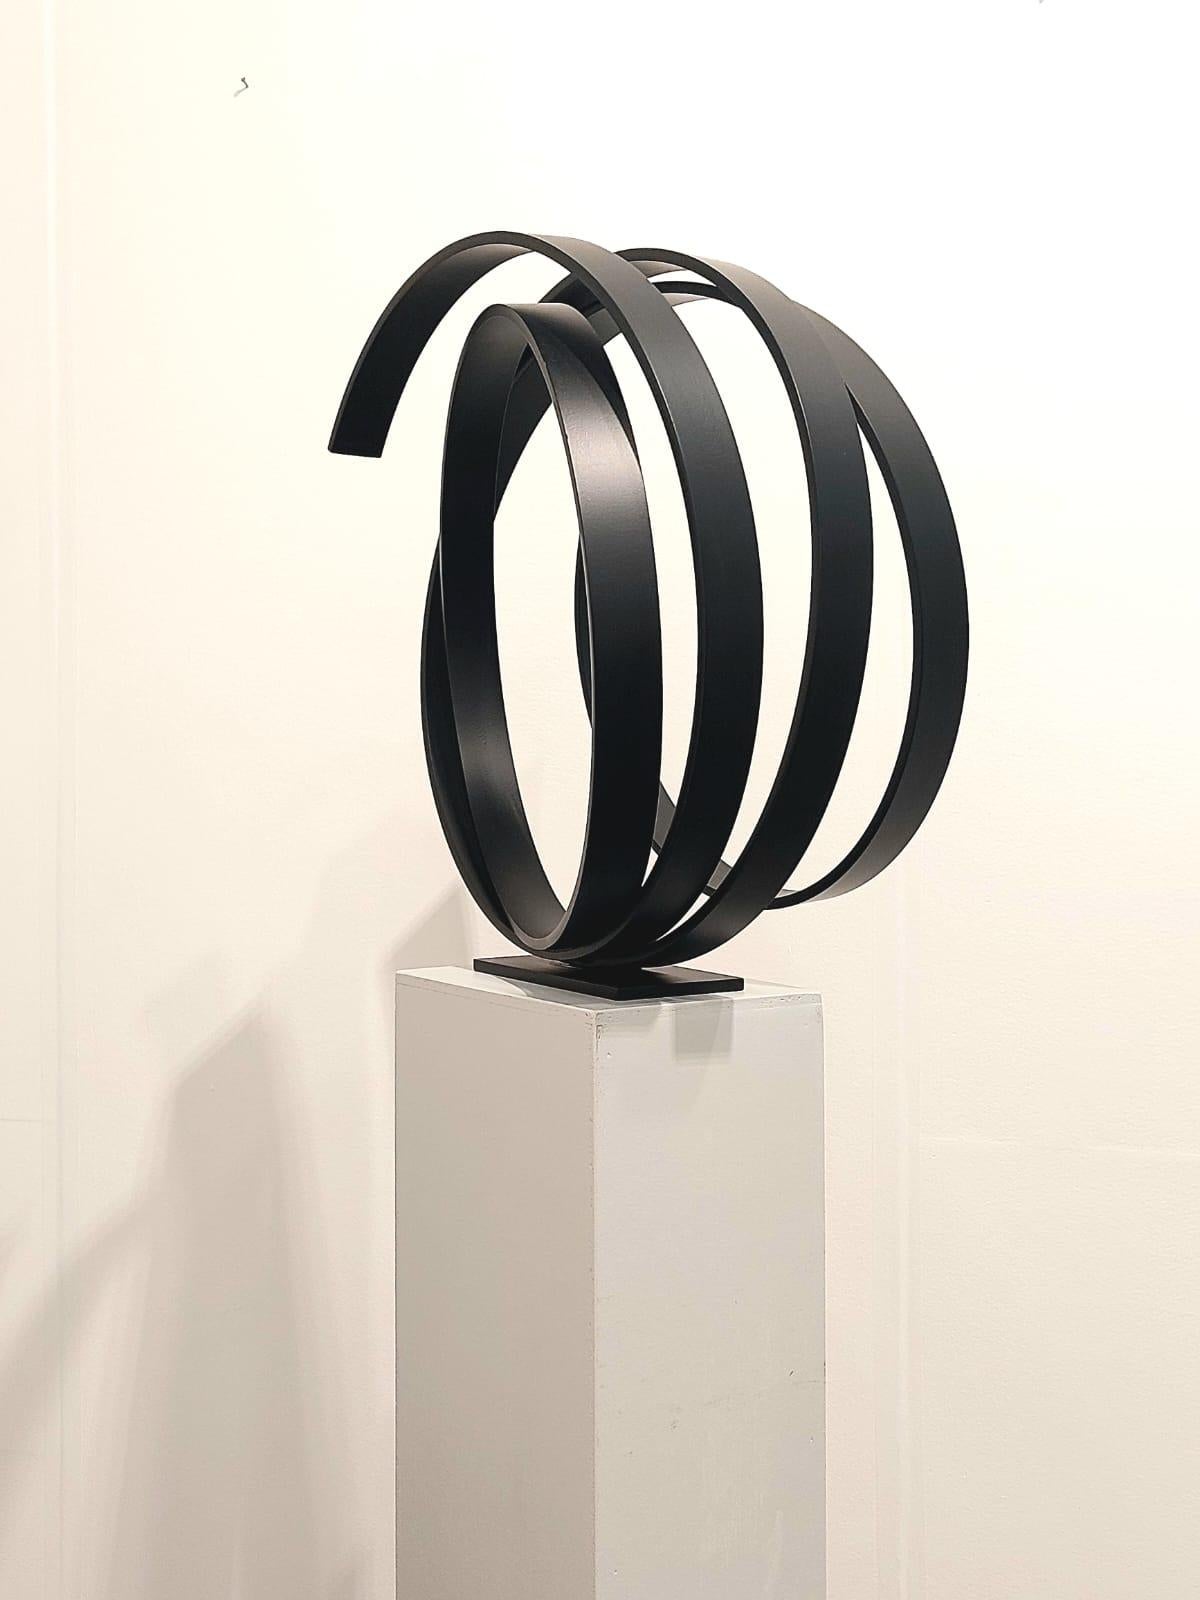 Large Black Orbit by Kuno Vollet - Large Contemporary Round Orbit sculpture  For Sale 4